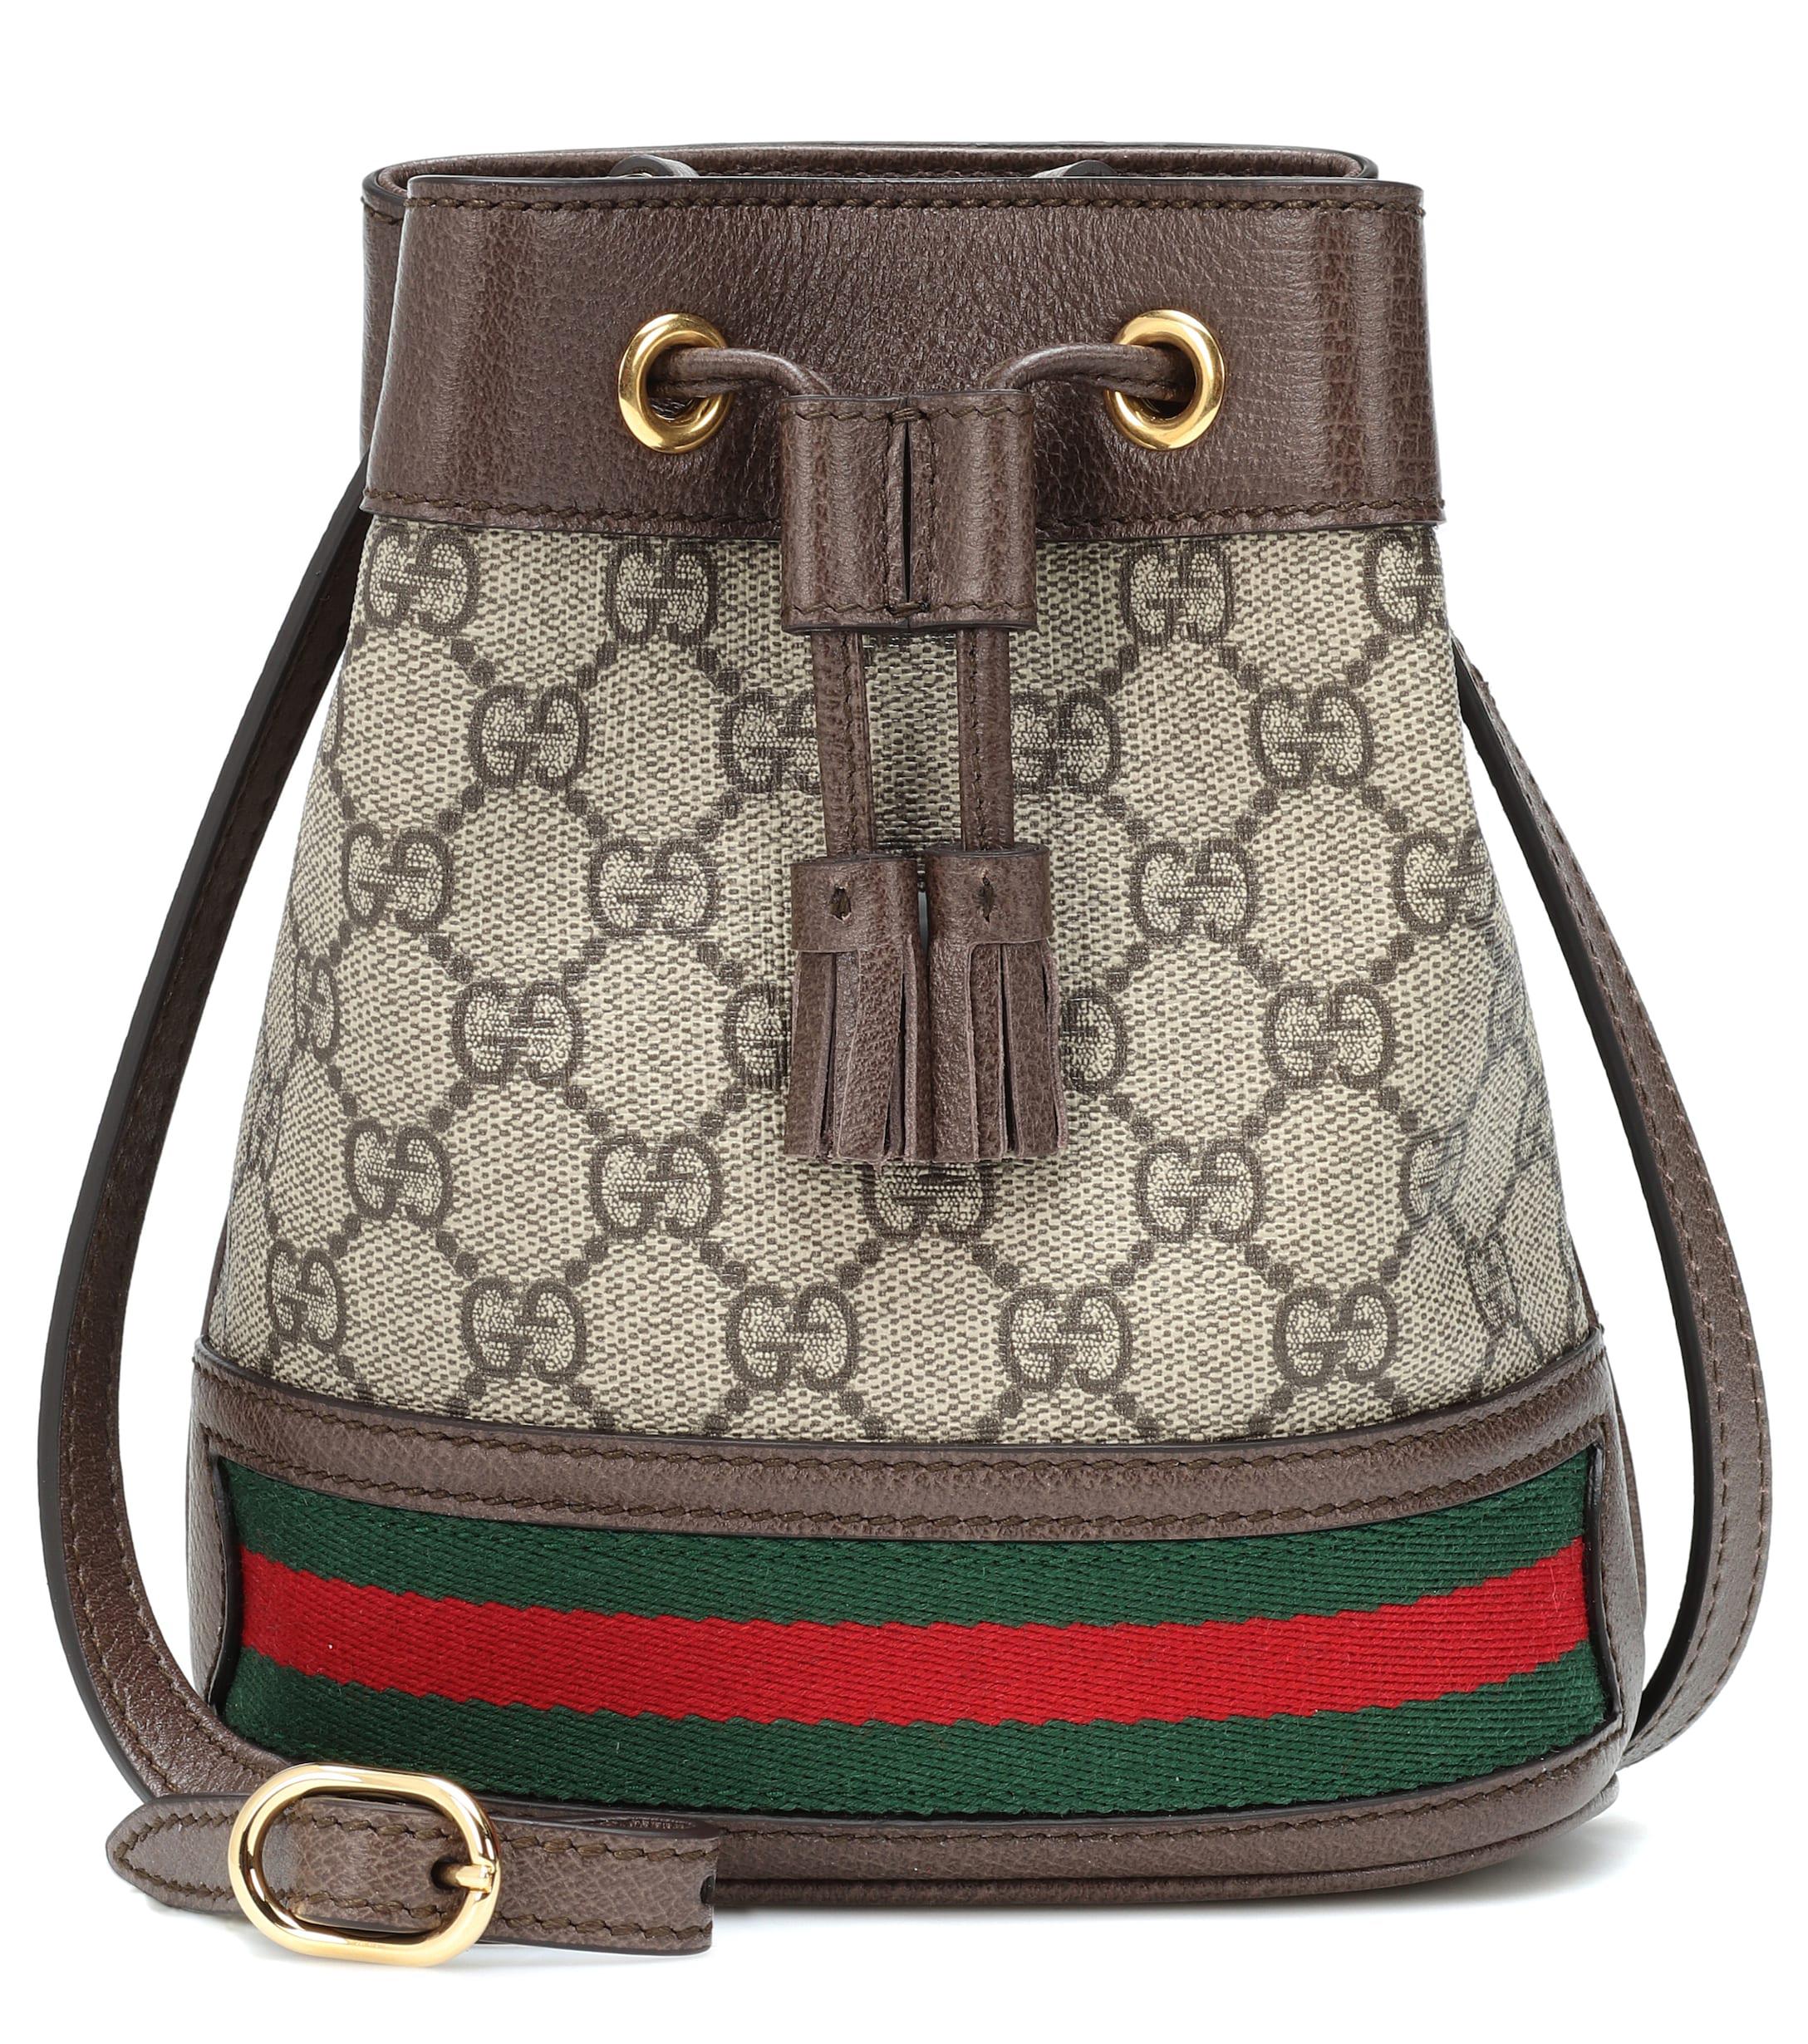 Gucci Canvas Ophidia GG Mini Bucket Bag in Beige (Natural) - Lyst